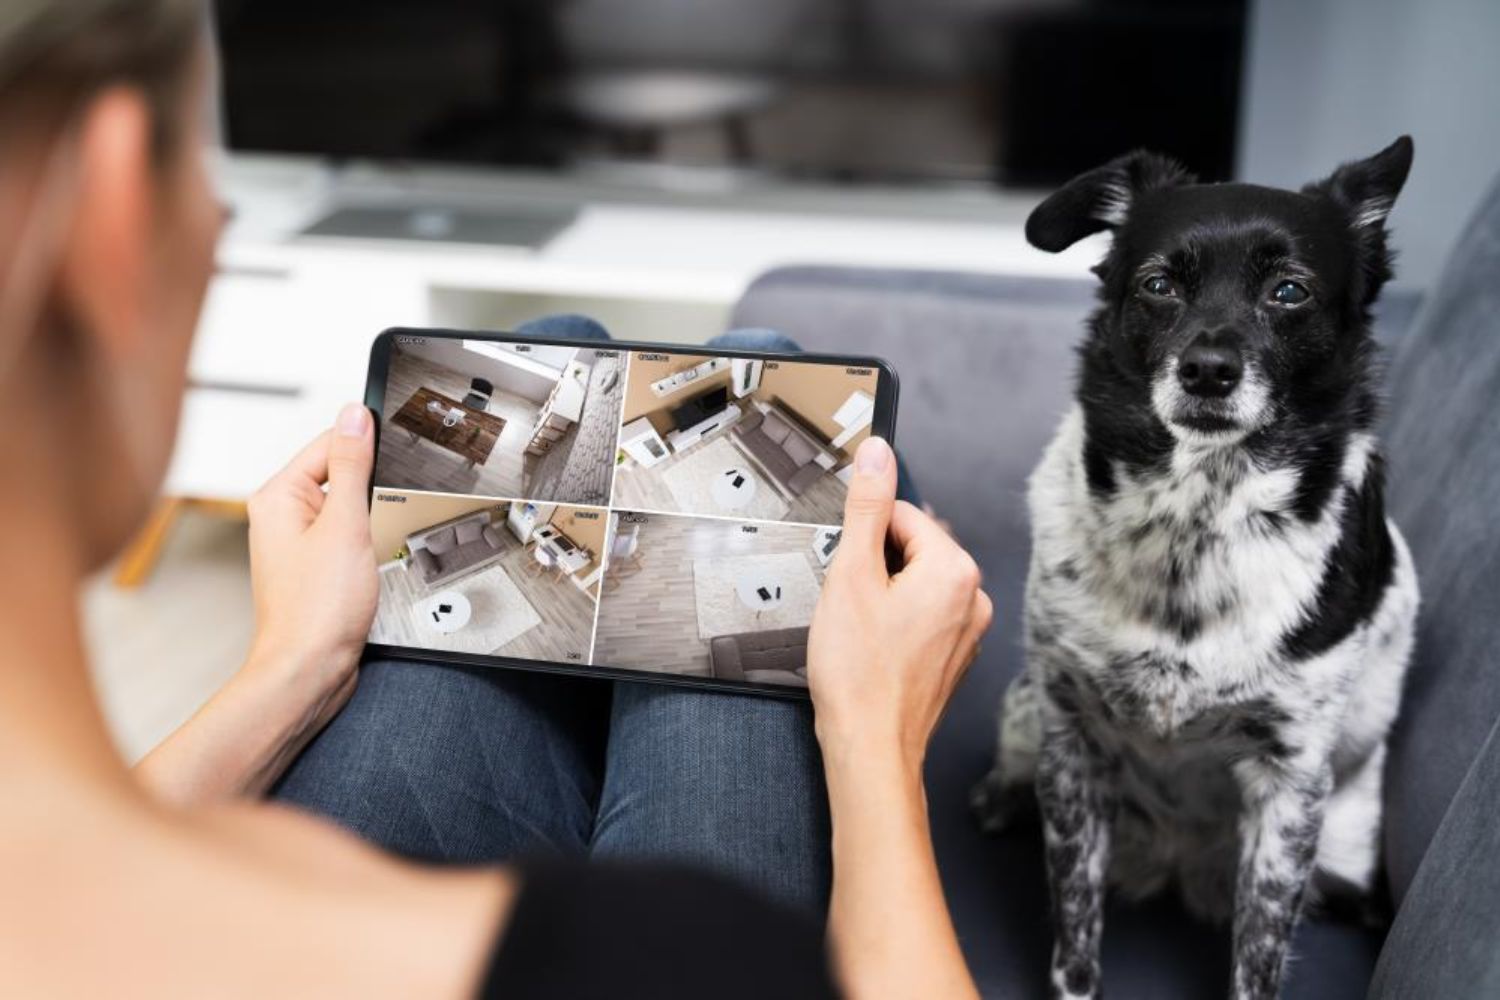 man looking at pet camera recording file on iPad photo by Andrey_Popov on shutterstock